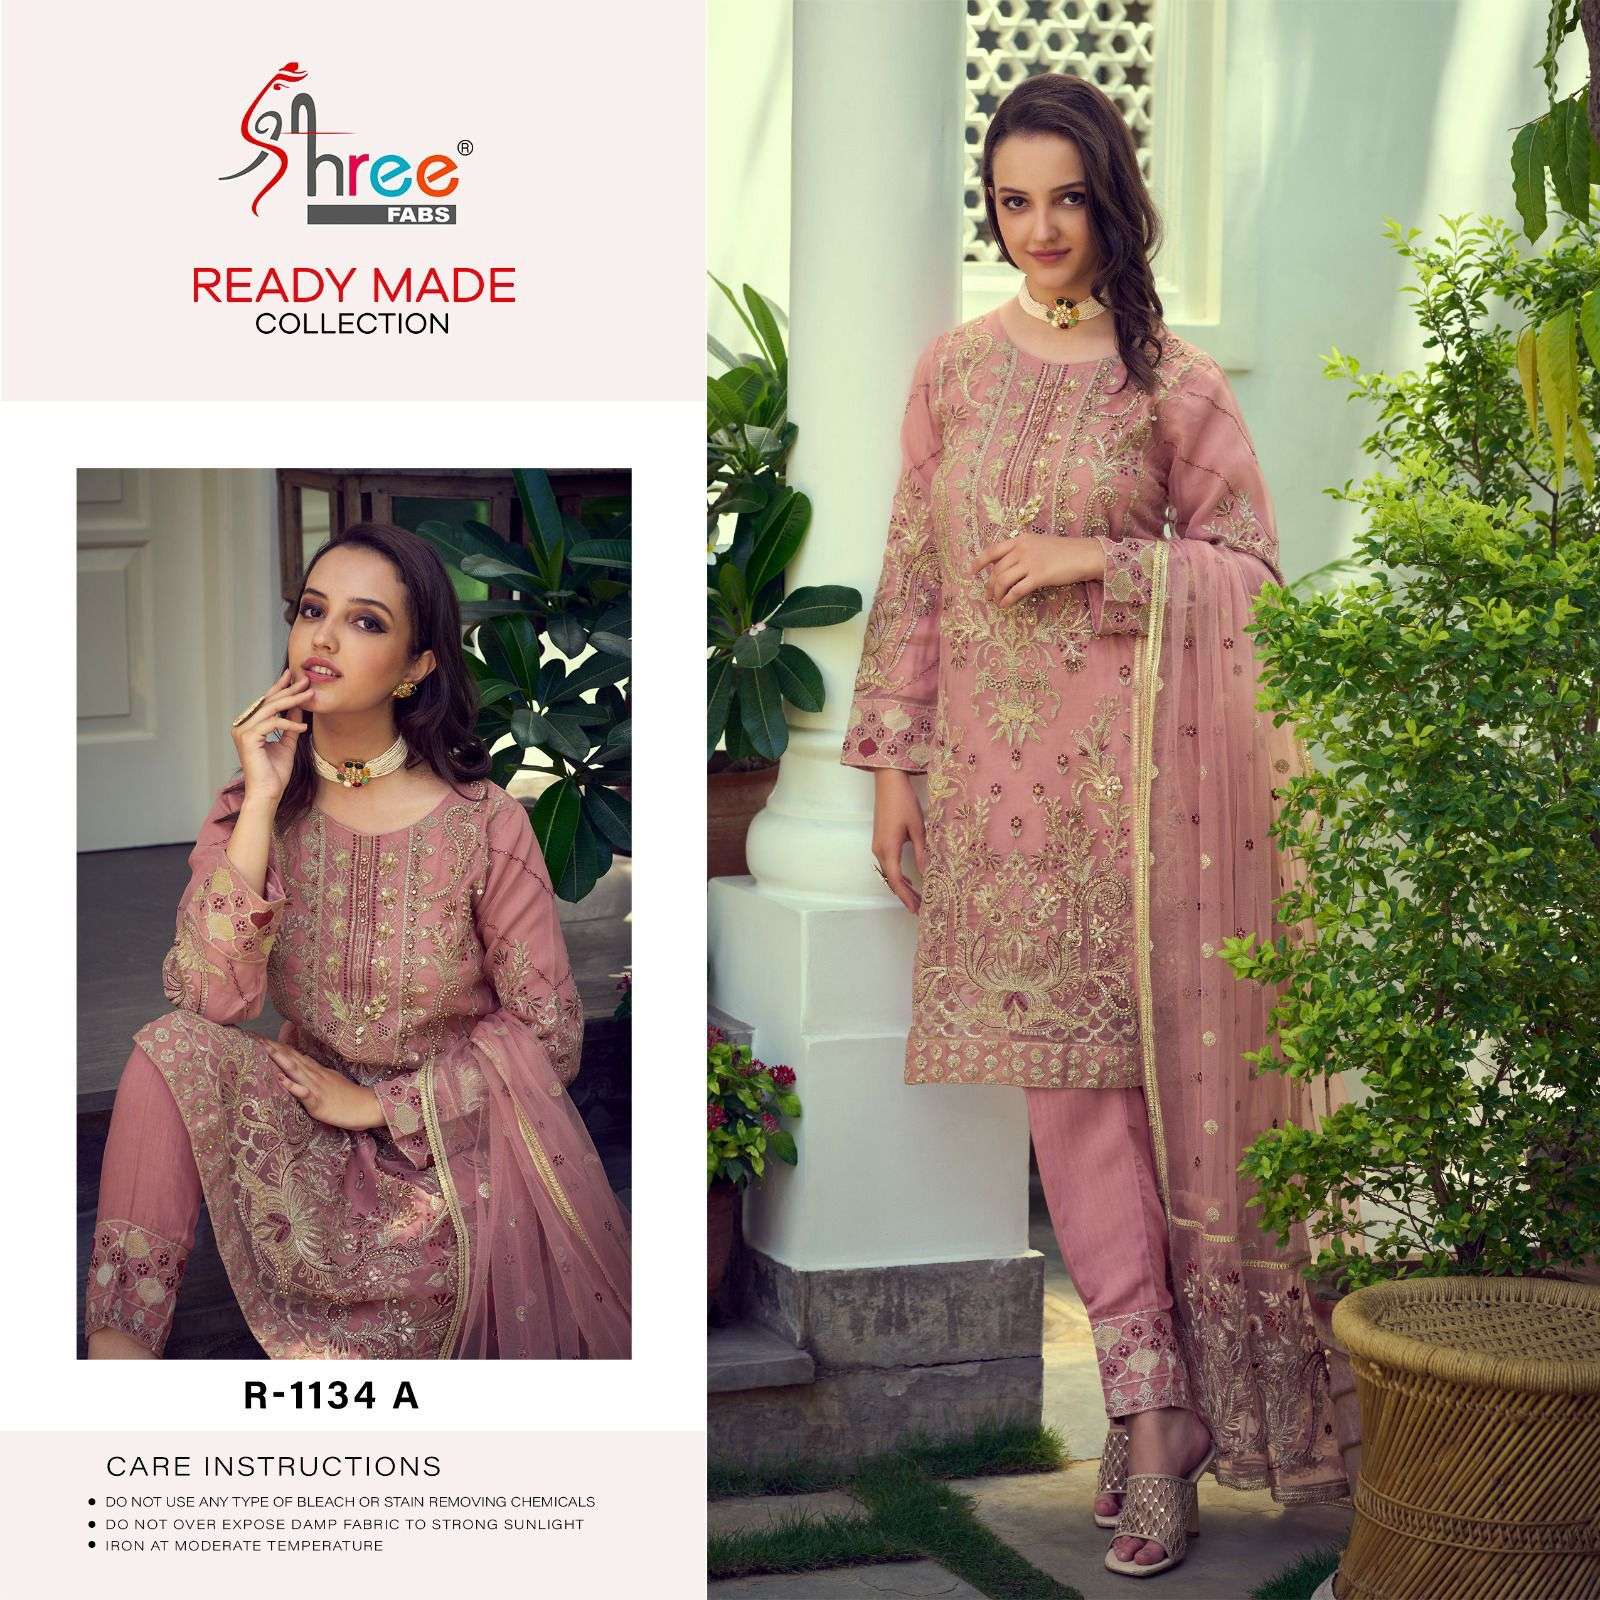 shree fabs 1134 organza heavy embroidered readymade collection wholesale price 